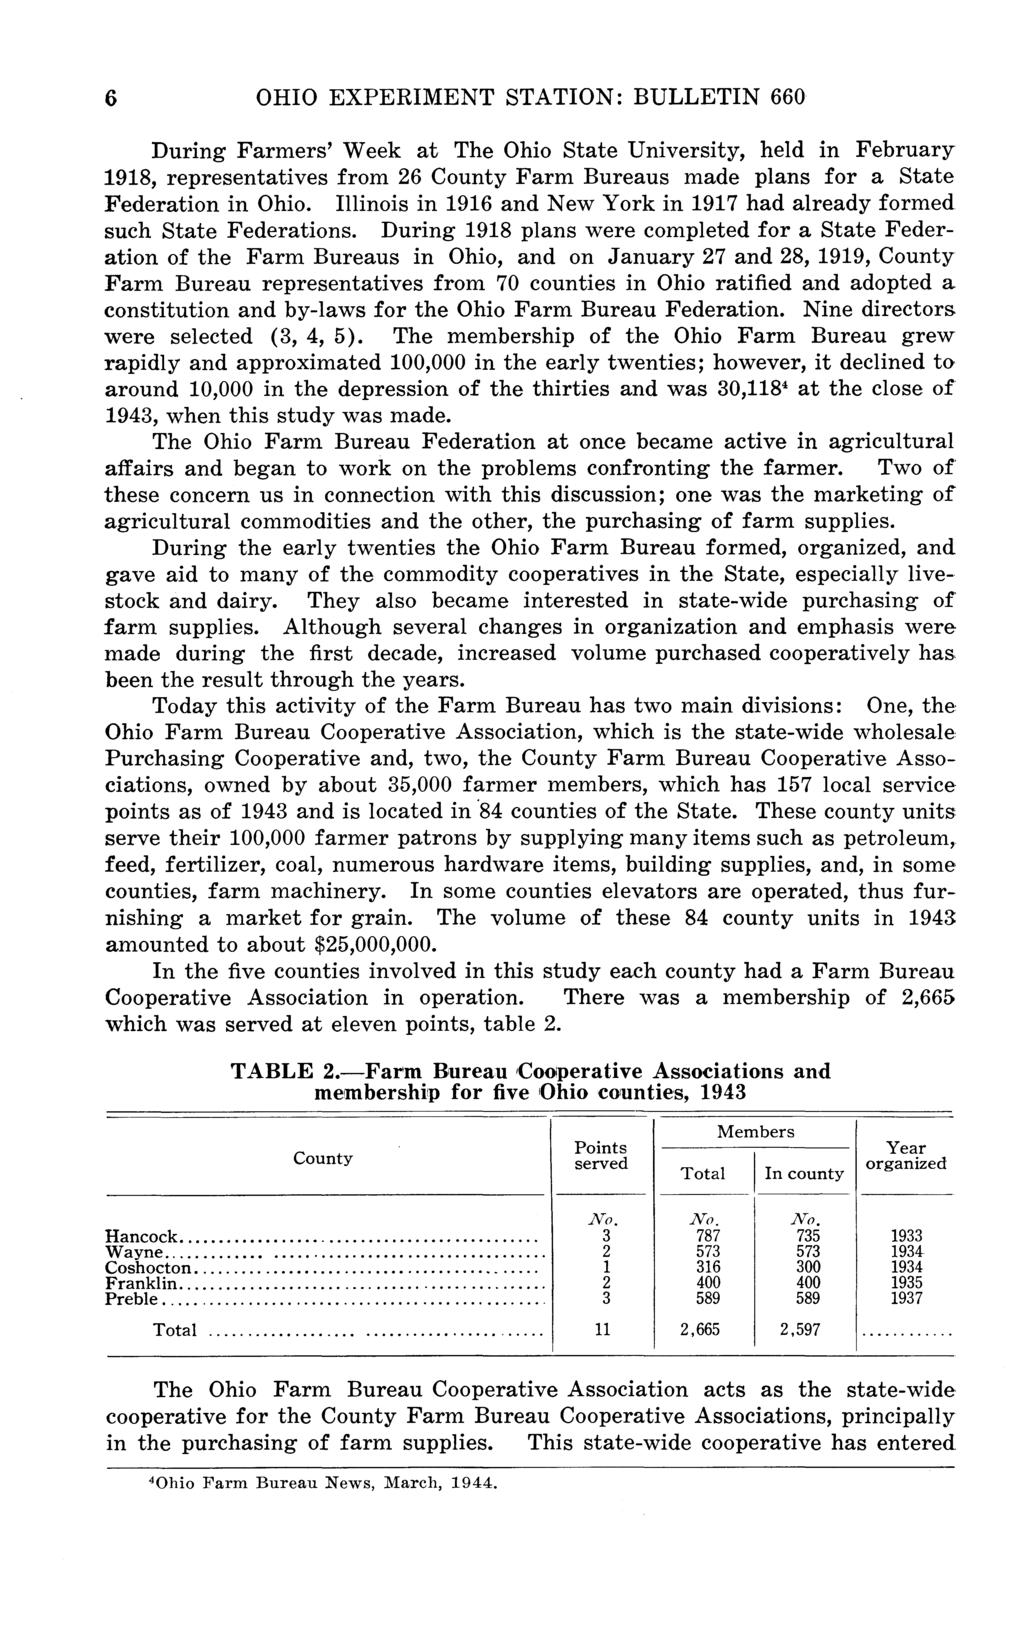 6 OHIO EXPERIMENT STATION: BULLETIN 660 During Farmers' Week at The Ohio State University, held in February 1918, representatives from 26 County Farm Bureaus made plans for a State Federation in Ohio.